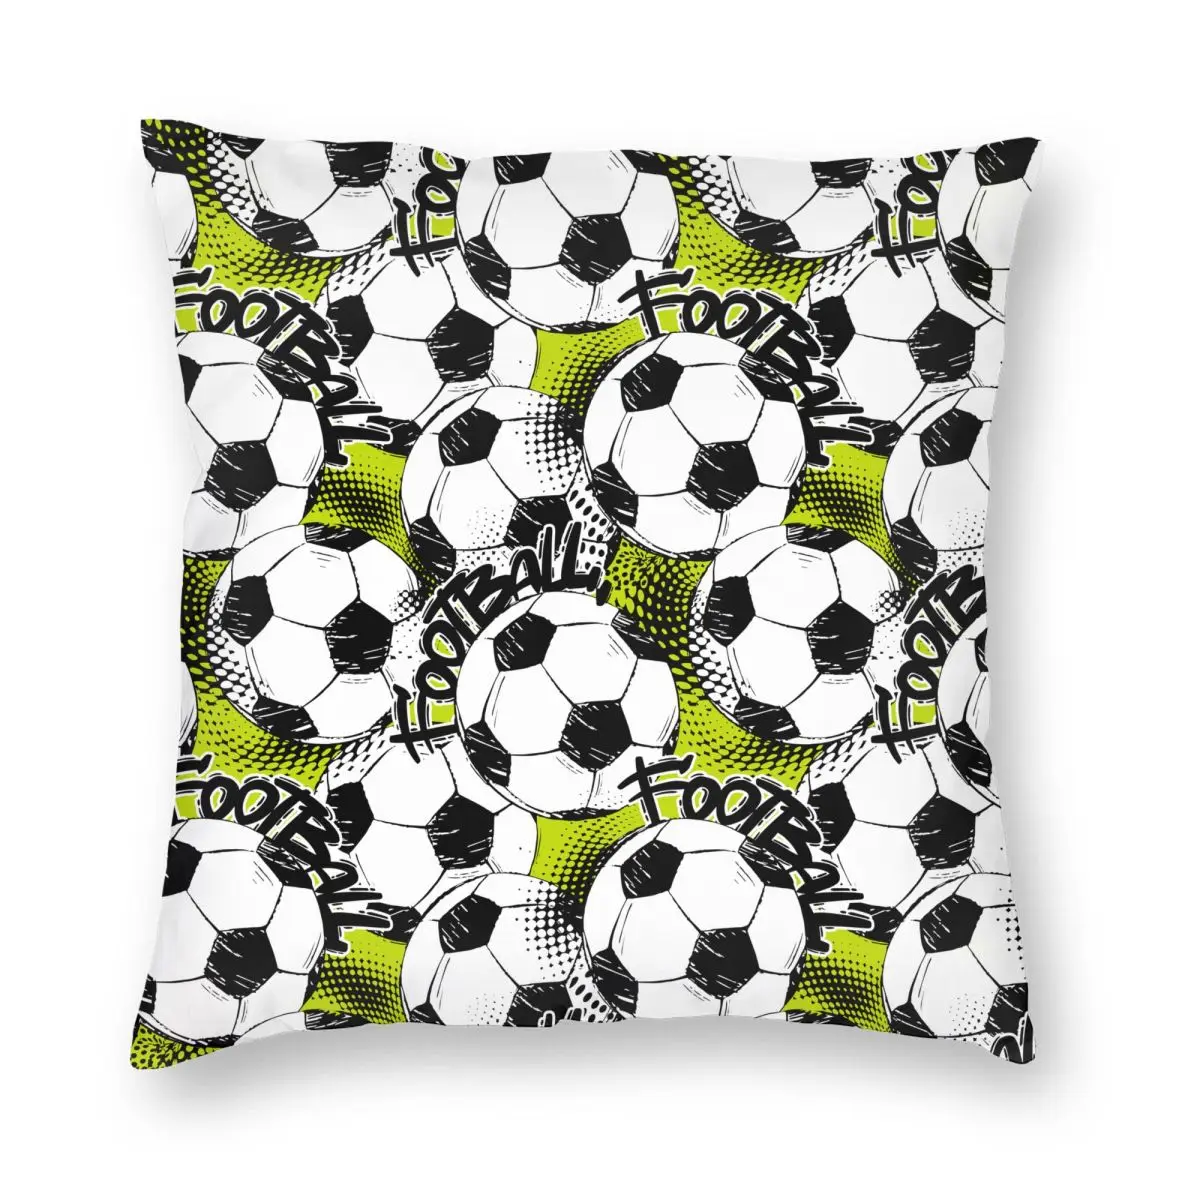 

Football Sport Balls Soccer Pillowcase Printed Cushion Cover Decorations Throw Pillow Case Cover Bedroom Drop Shipping 40X40cm